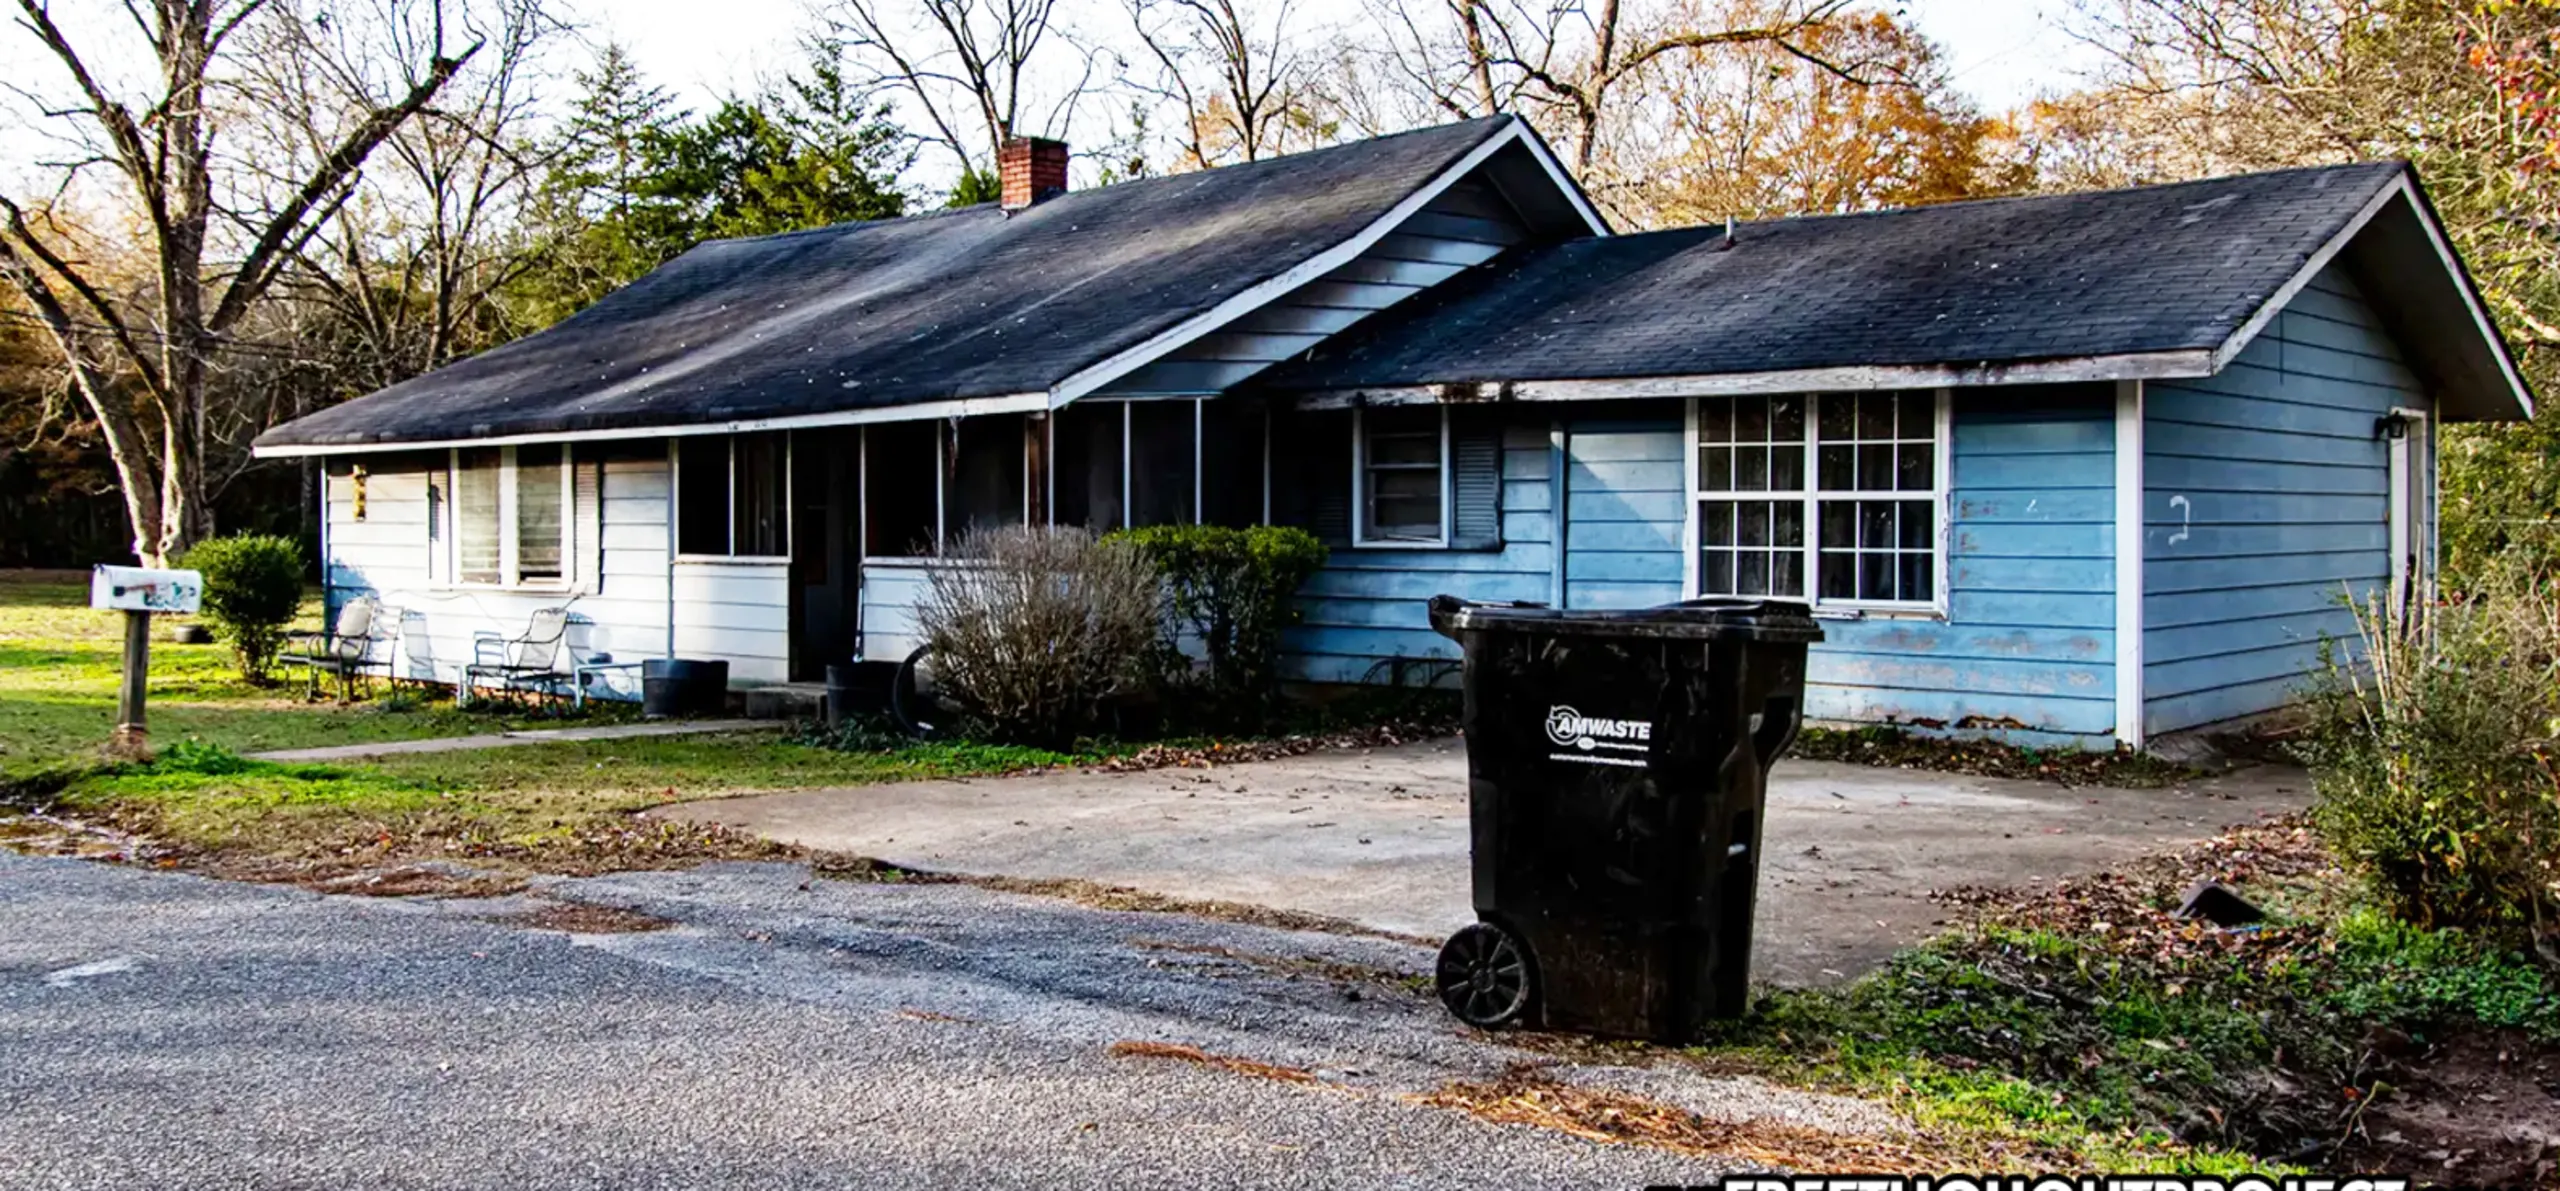 Alabama Cops Jail 82 Year Old Grandmother for Unpaid $70 Trash Bill